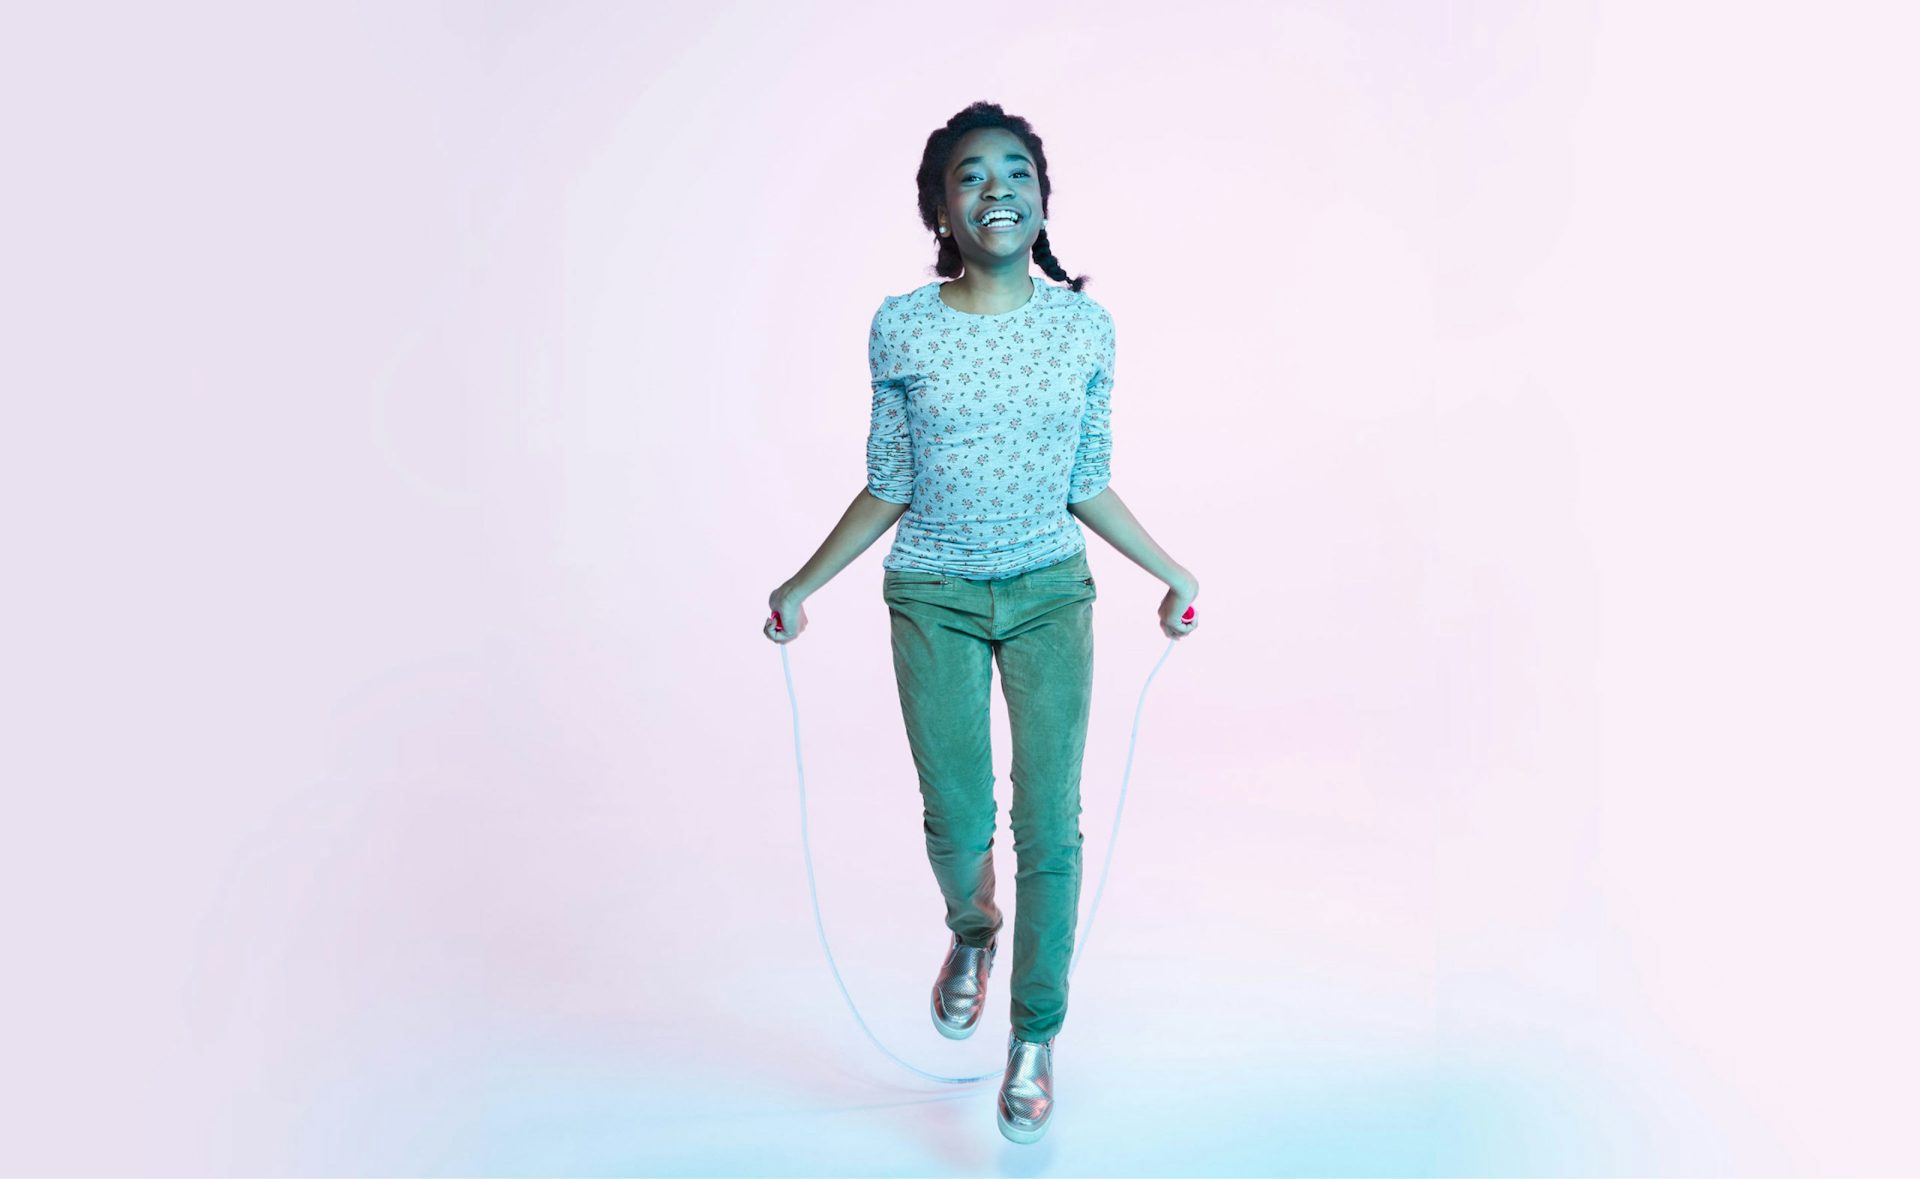 An African American/Black teen girl playing jump rope